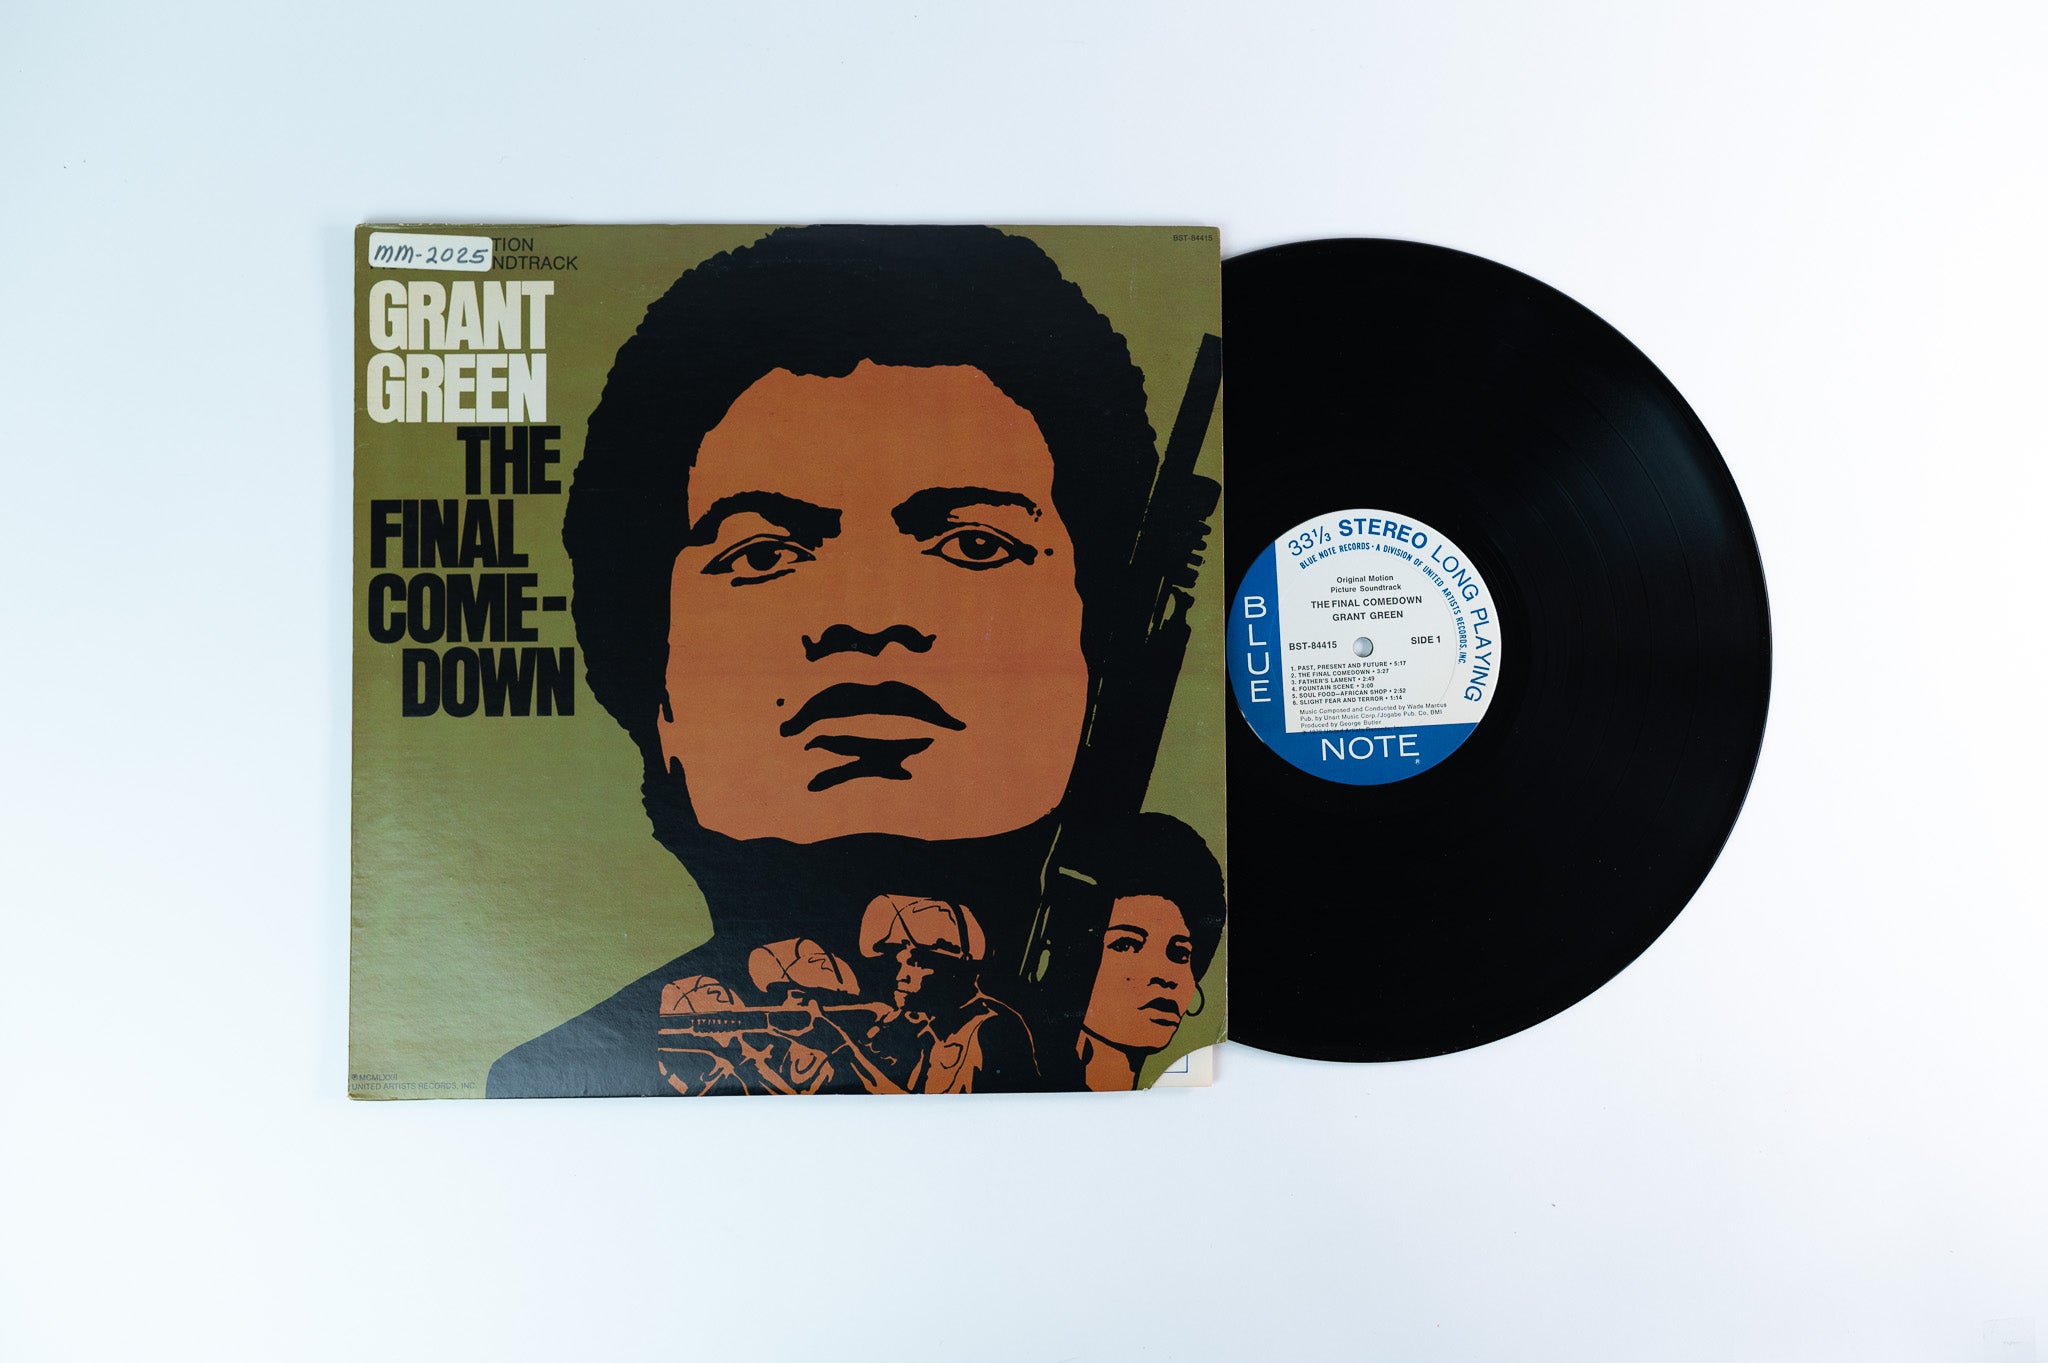 Grant Green - The Final Comedown (Original Soundtrack) on Blue Note United Artists